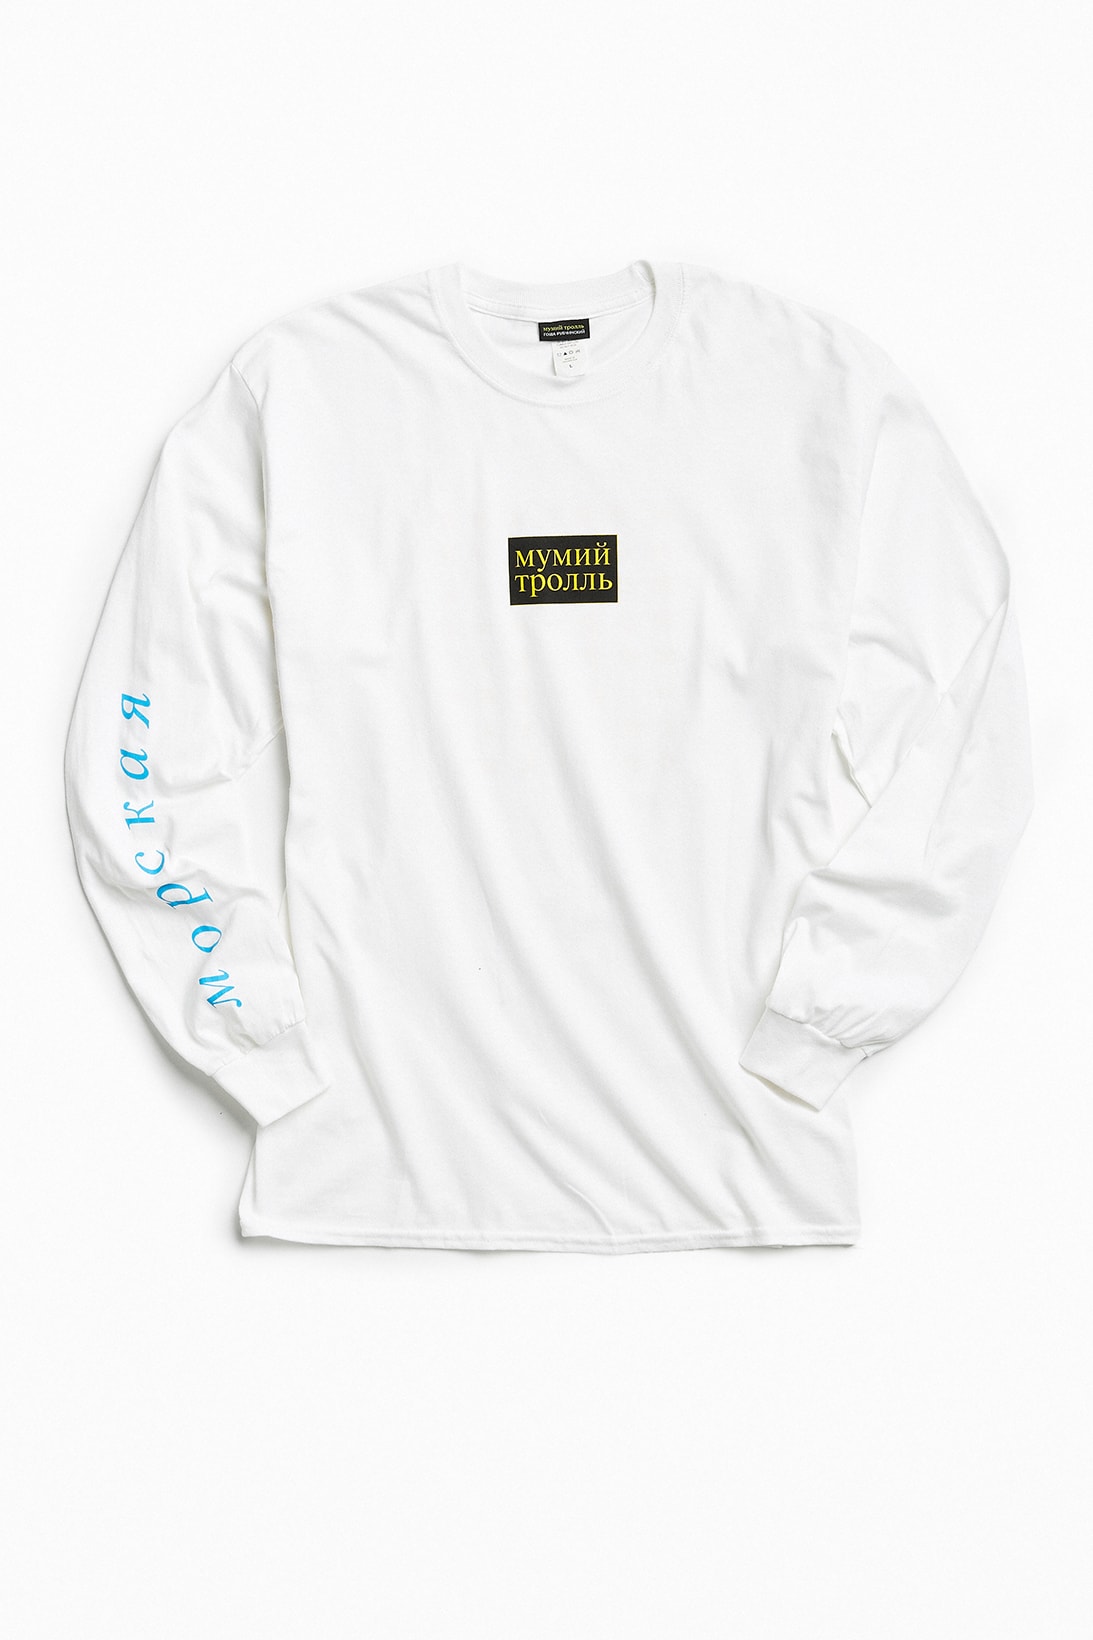 Gosha Rubchinskiy Mumiy Troll Urban Outfitters Collaboration Russia Capsule Collection T Shirt short long sleeve hoodies 2017 December 15 18 Release Date Info Drops